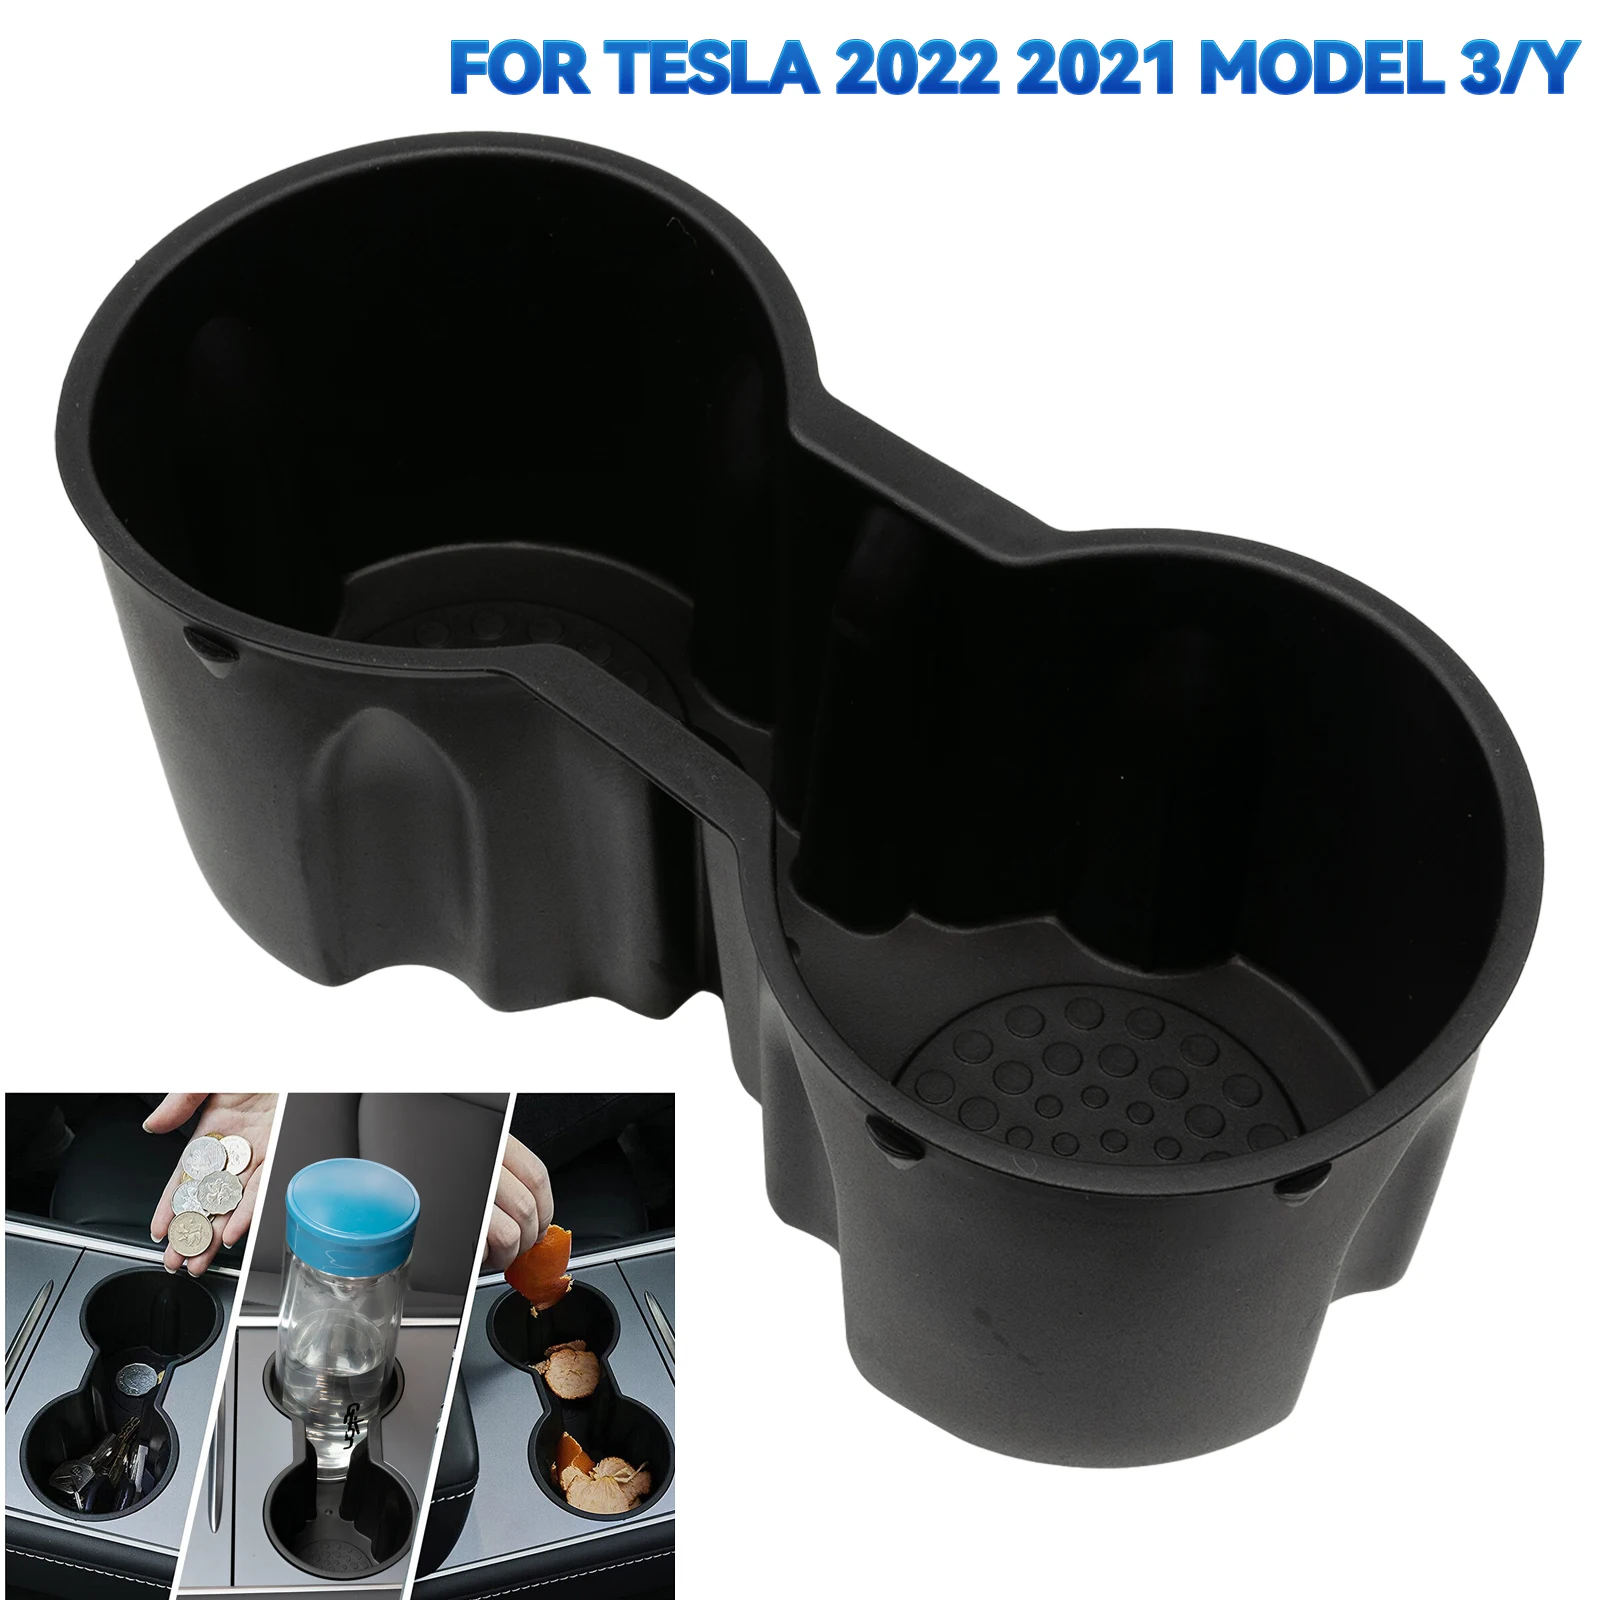 

Universal Water Cup Hoder Storage Box Non-toxic Tasteless Center Console Accessories Compatible for Tesla Model 3/Y 2021 2022